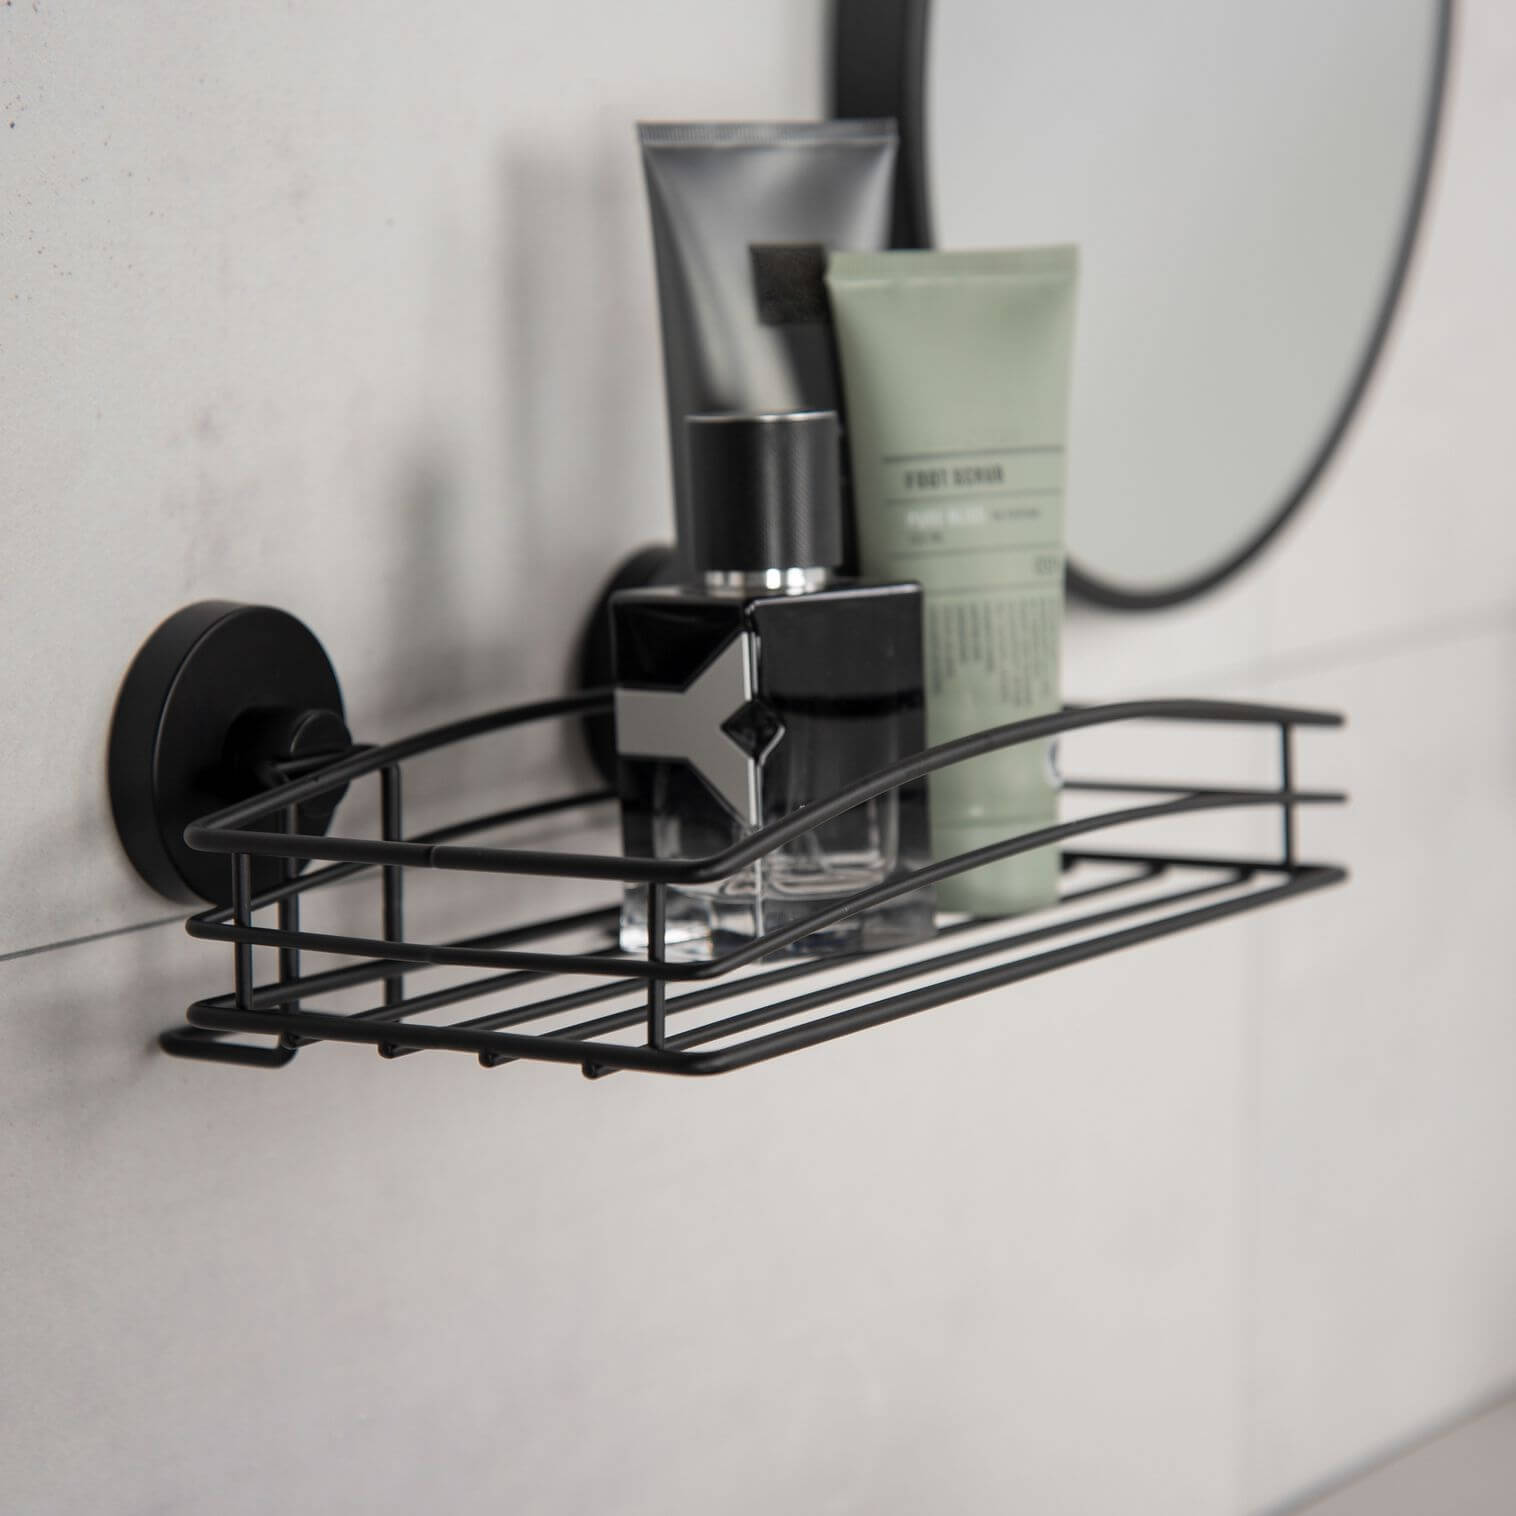 Bathroom Solutions Black Bathroom Shelf with Suction Cups for